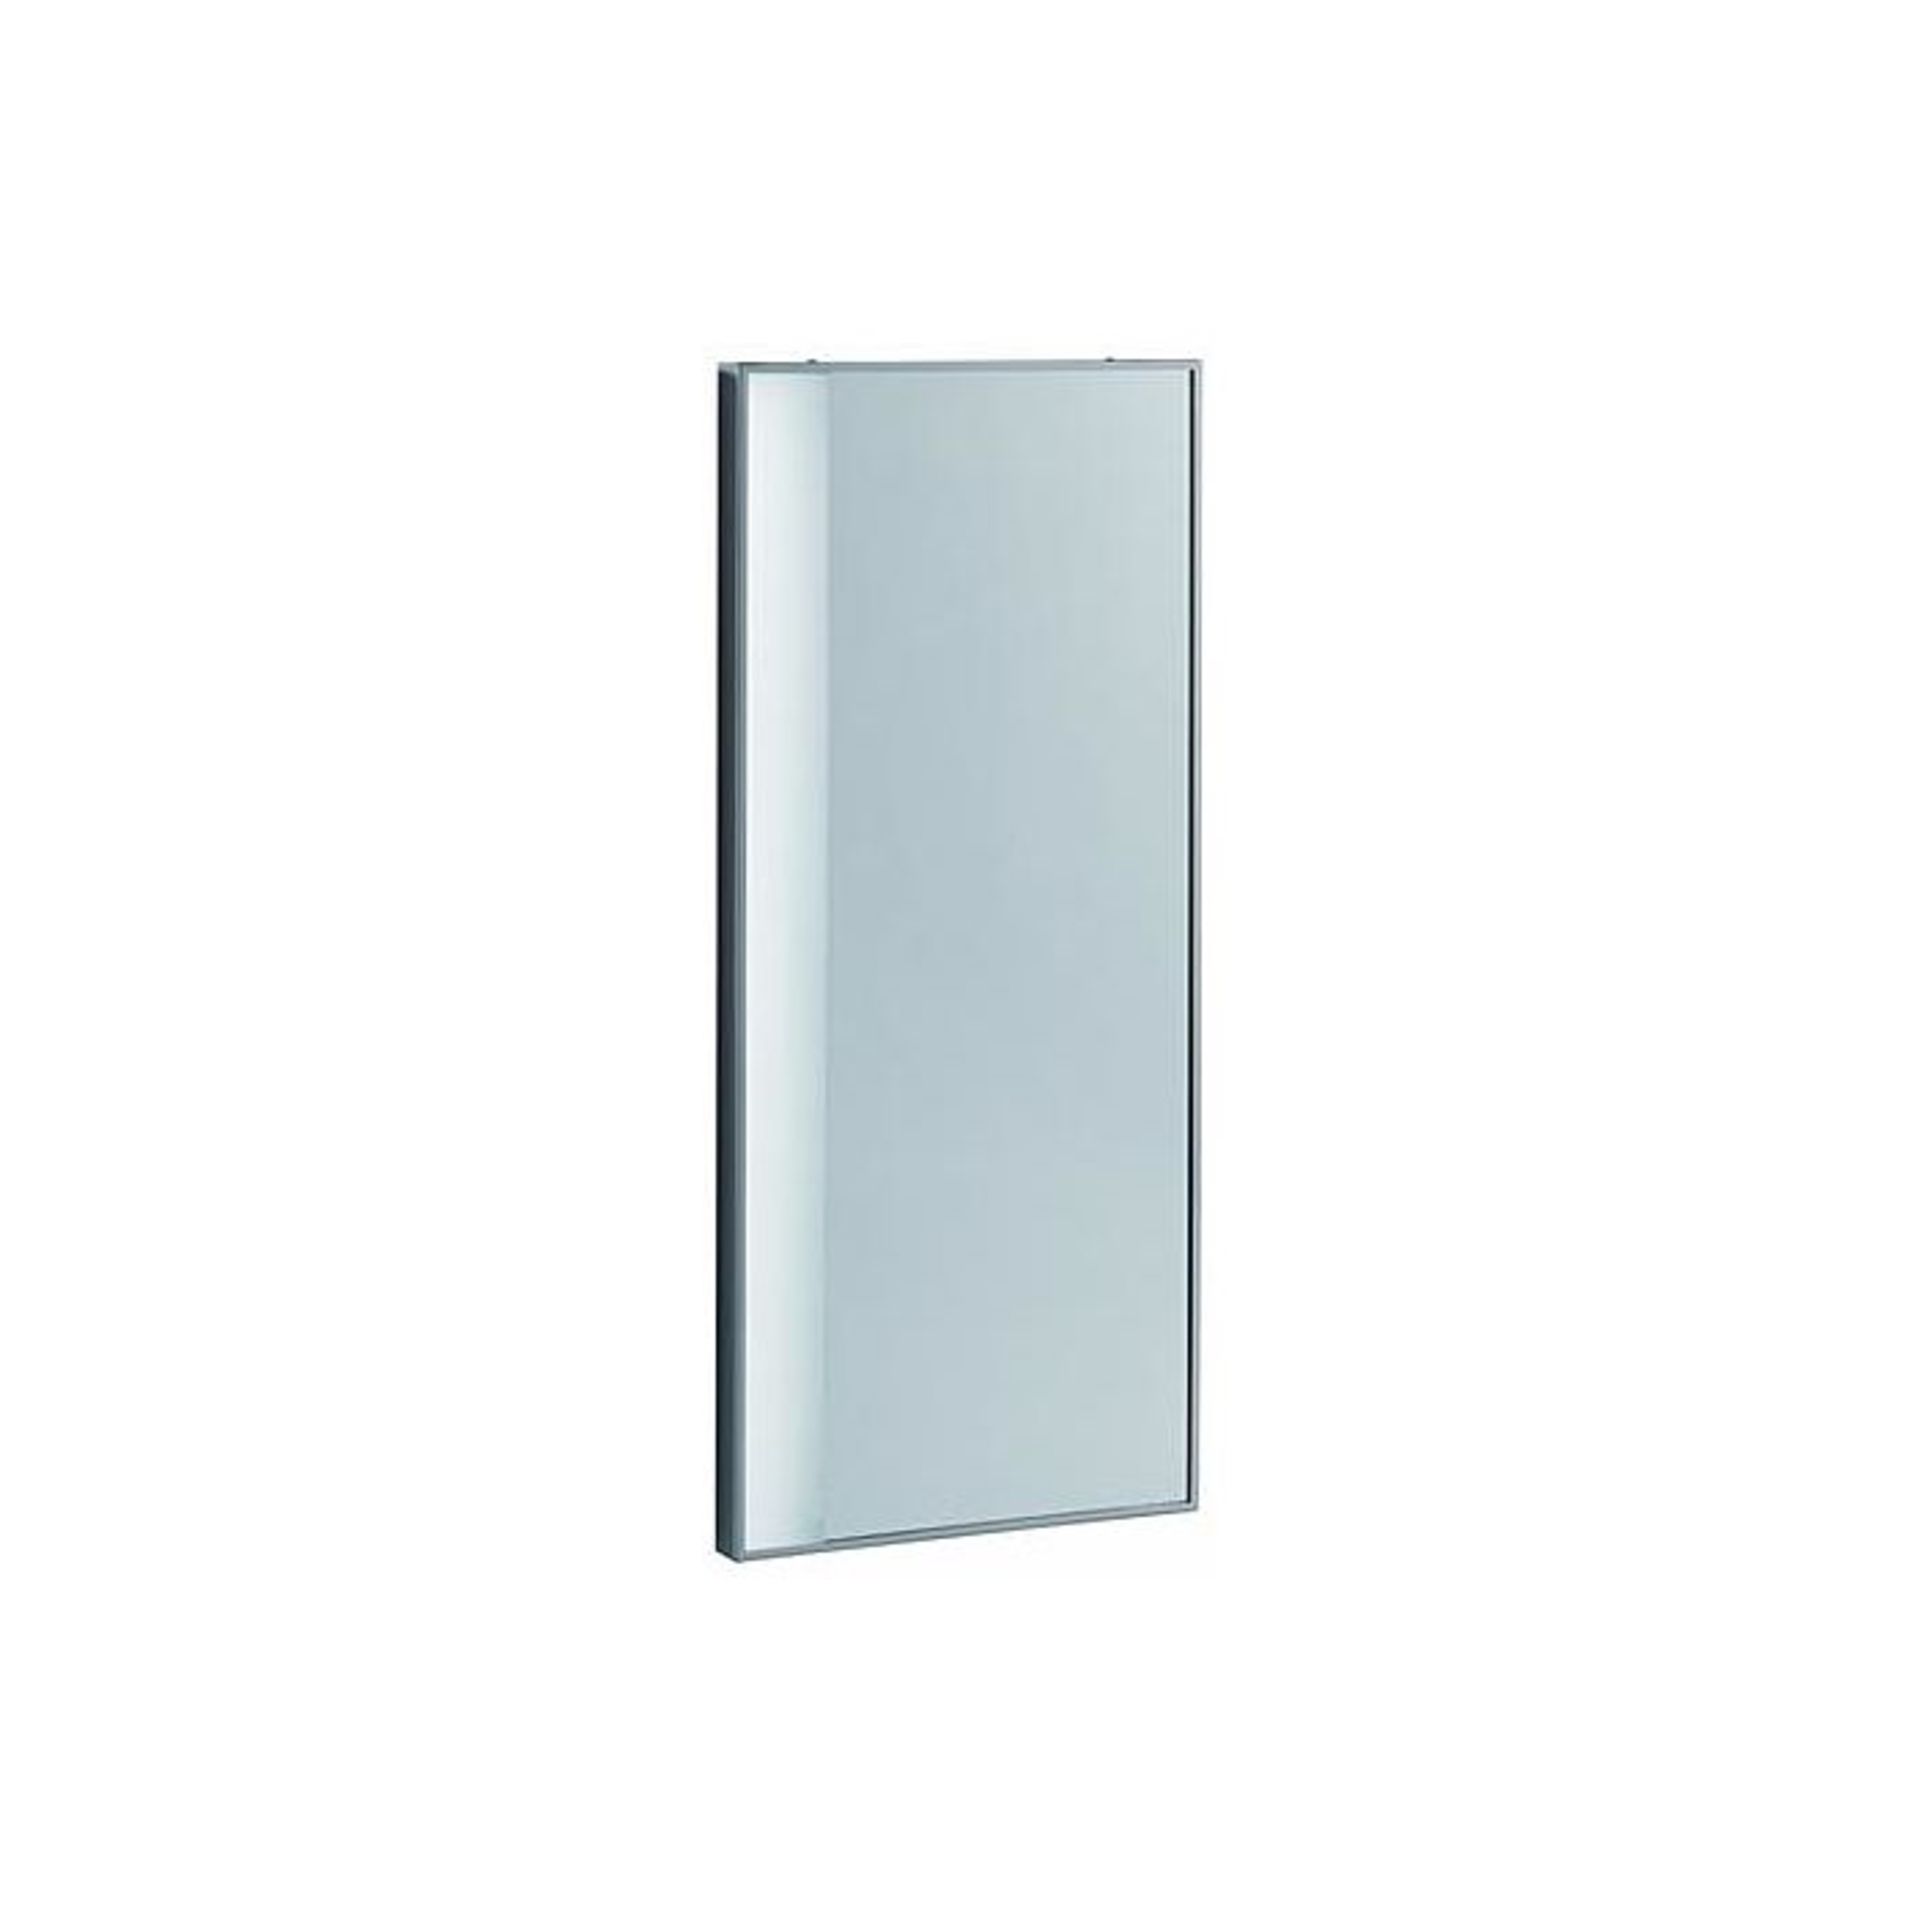 (RR30) 400x900mm Keramag Silk light mirror element - 6 cm, right or left. RRP £887.99. The K... ( - Image 3 of 3